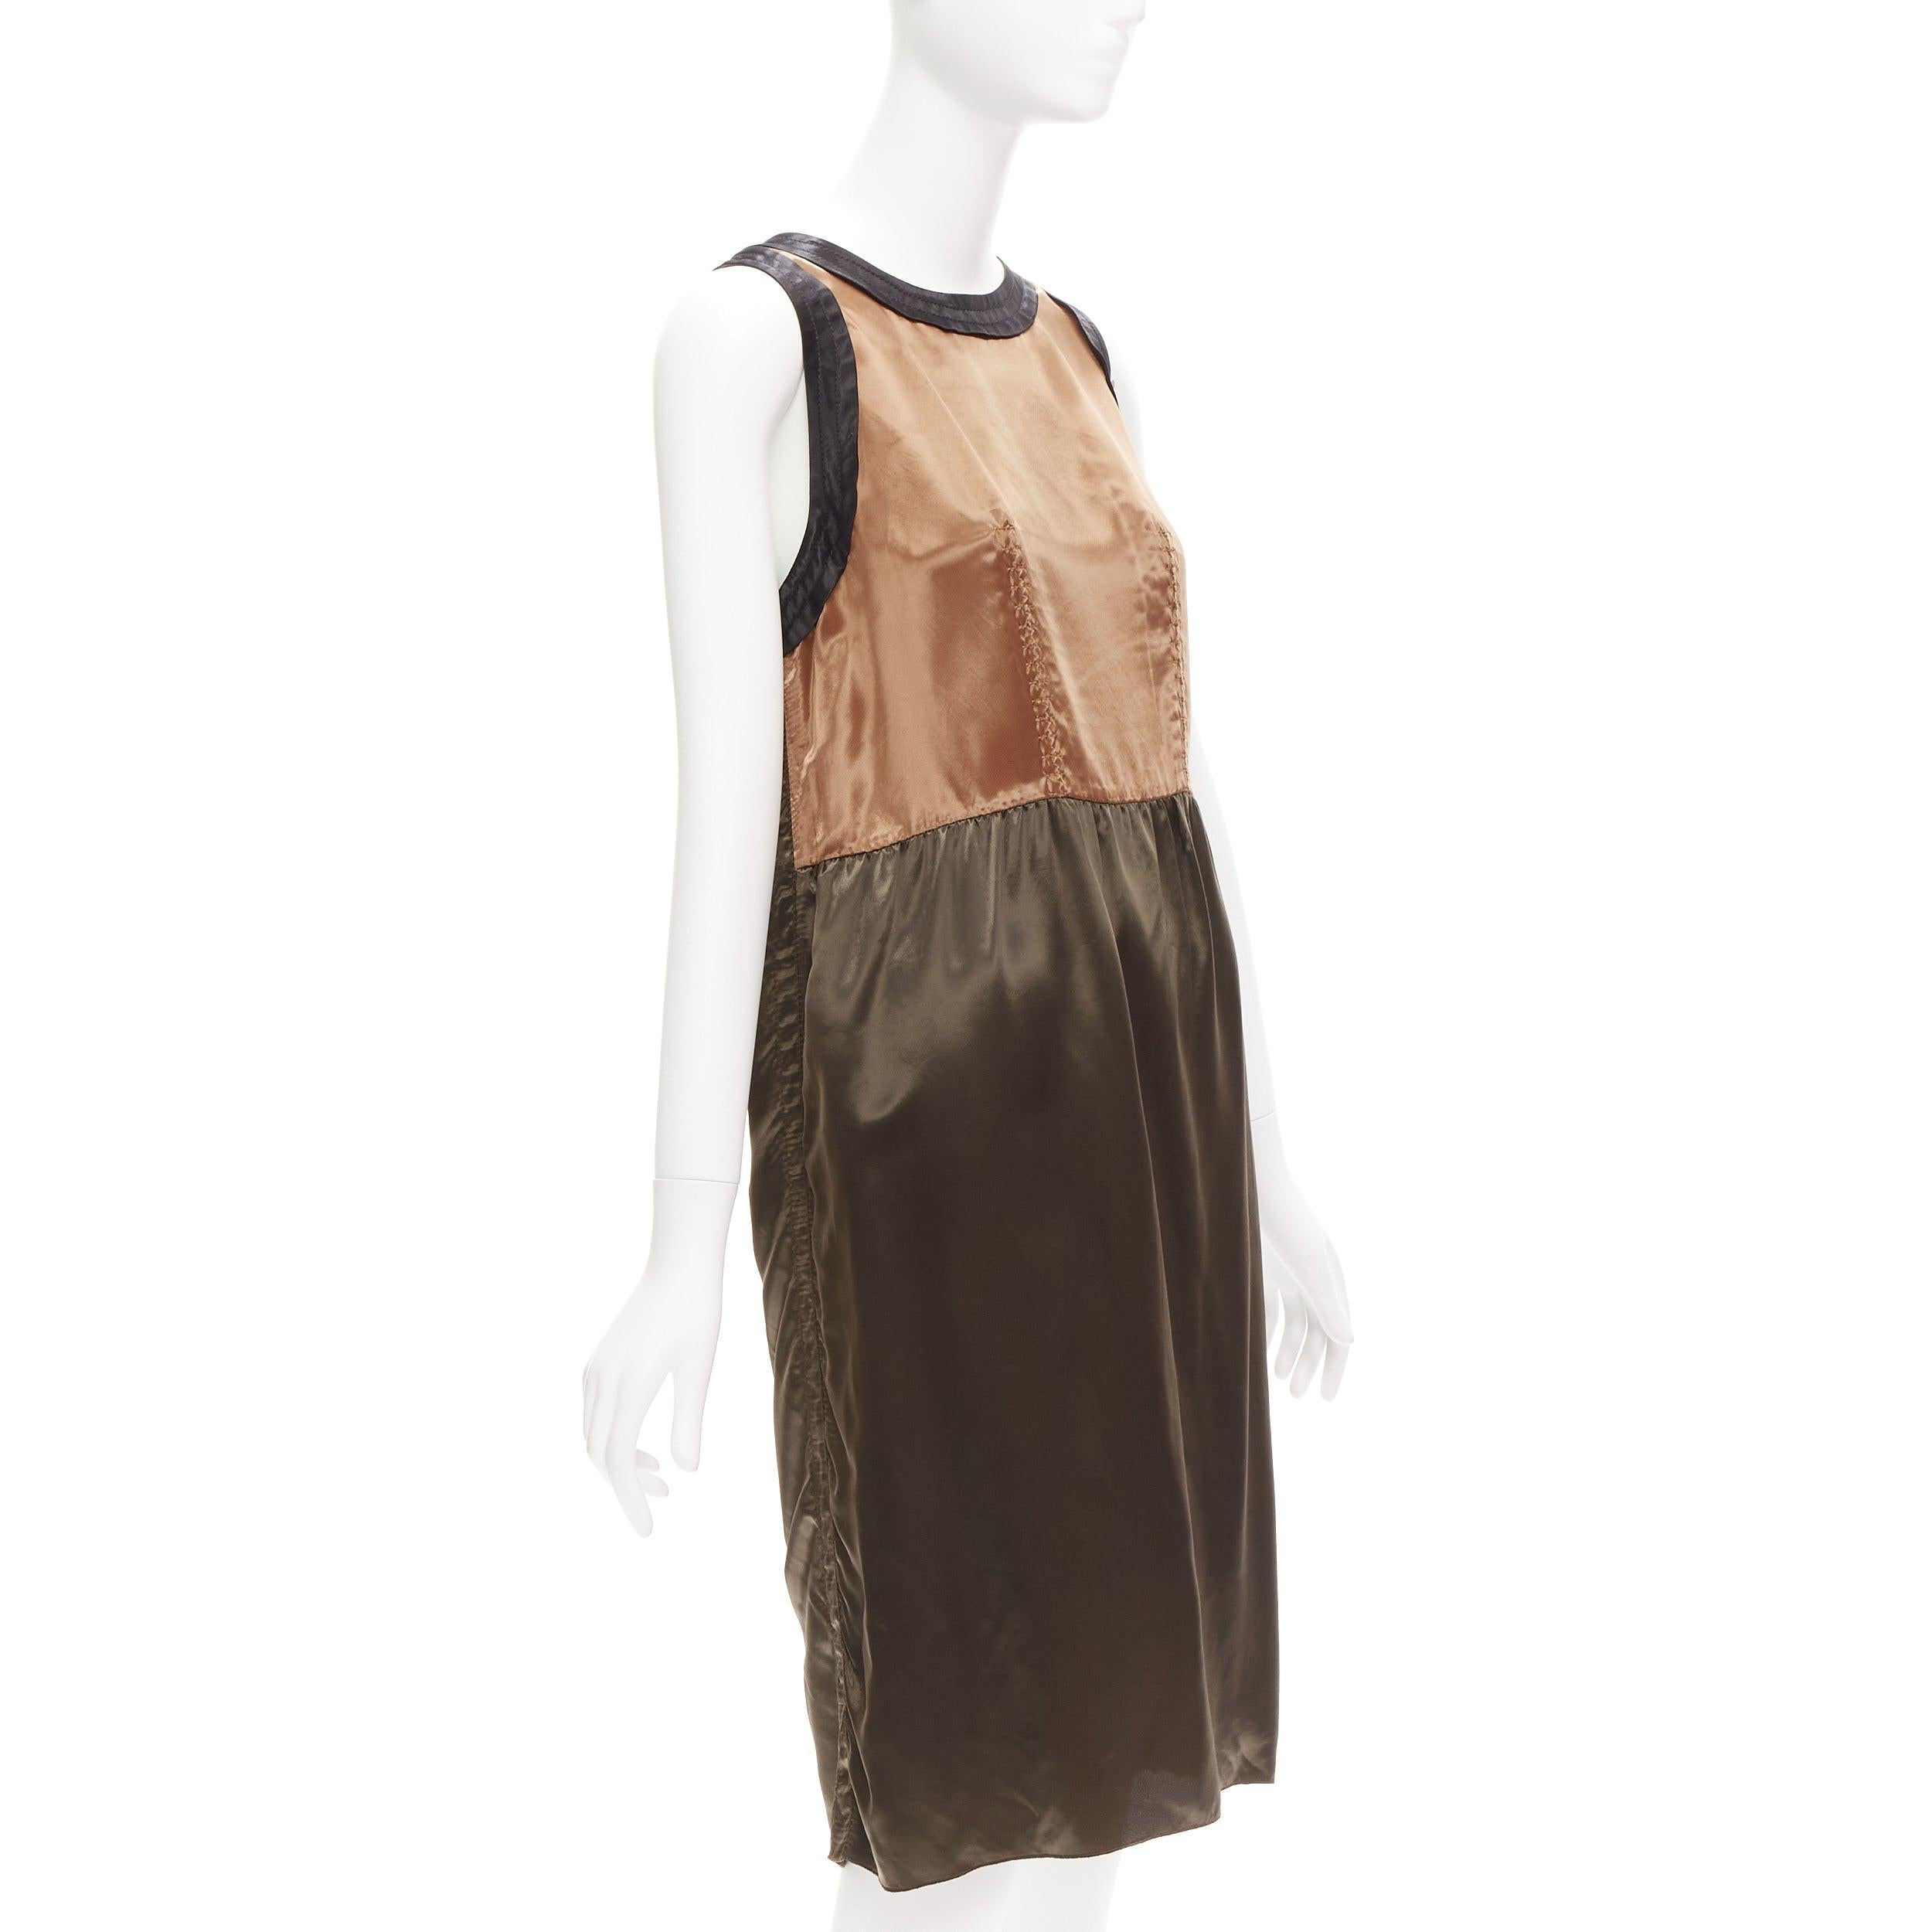 MARNI 2011 bronze brown satin colorblocked sleeveless dress IT40 S
Reference: CELG/A00277
Brand: Marni
Collection: 2011 Winter Collection
Material: Cupro
Color: Khaki, Brown
Pattern: Solid
Closure: Zip
Extra Details: Back zip.
Made in: